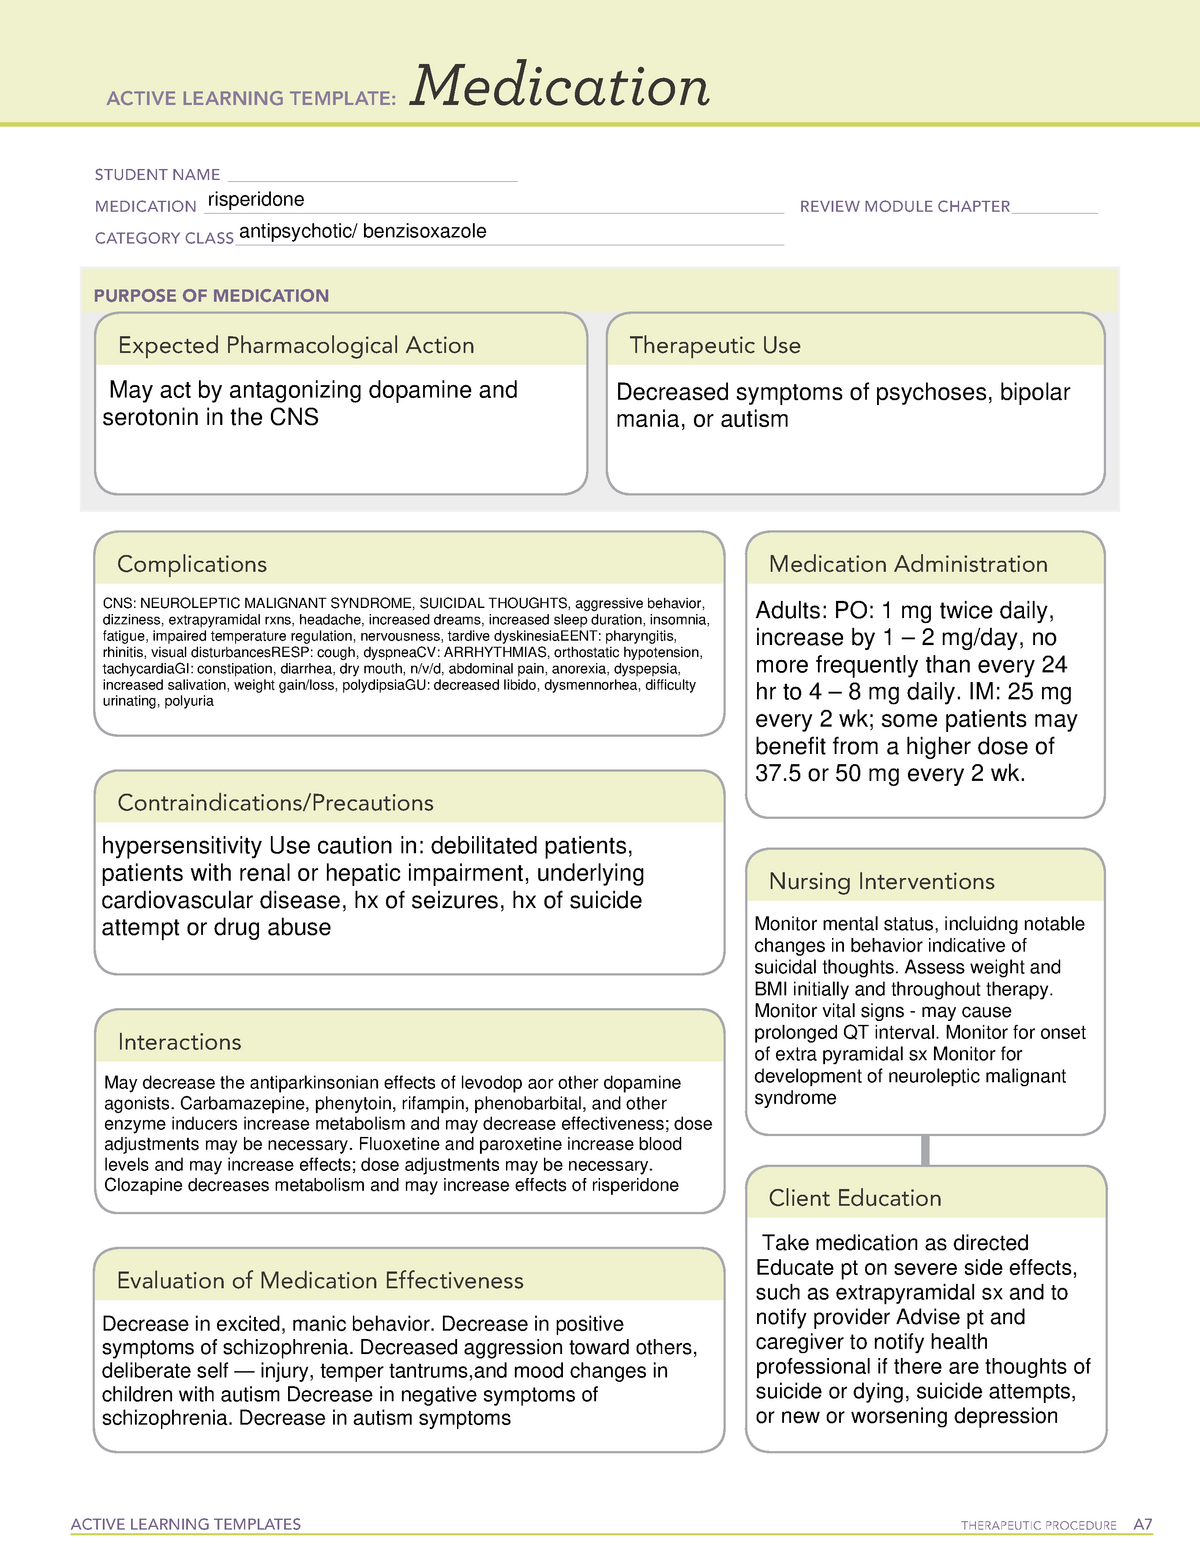 Med template risperidone ACTIVE LEARNING TEMPLATES THERAPEUTIC